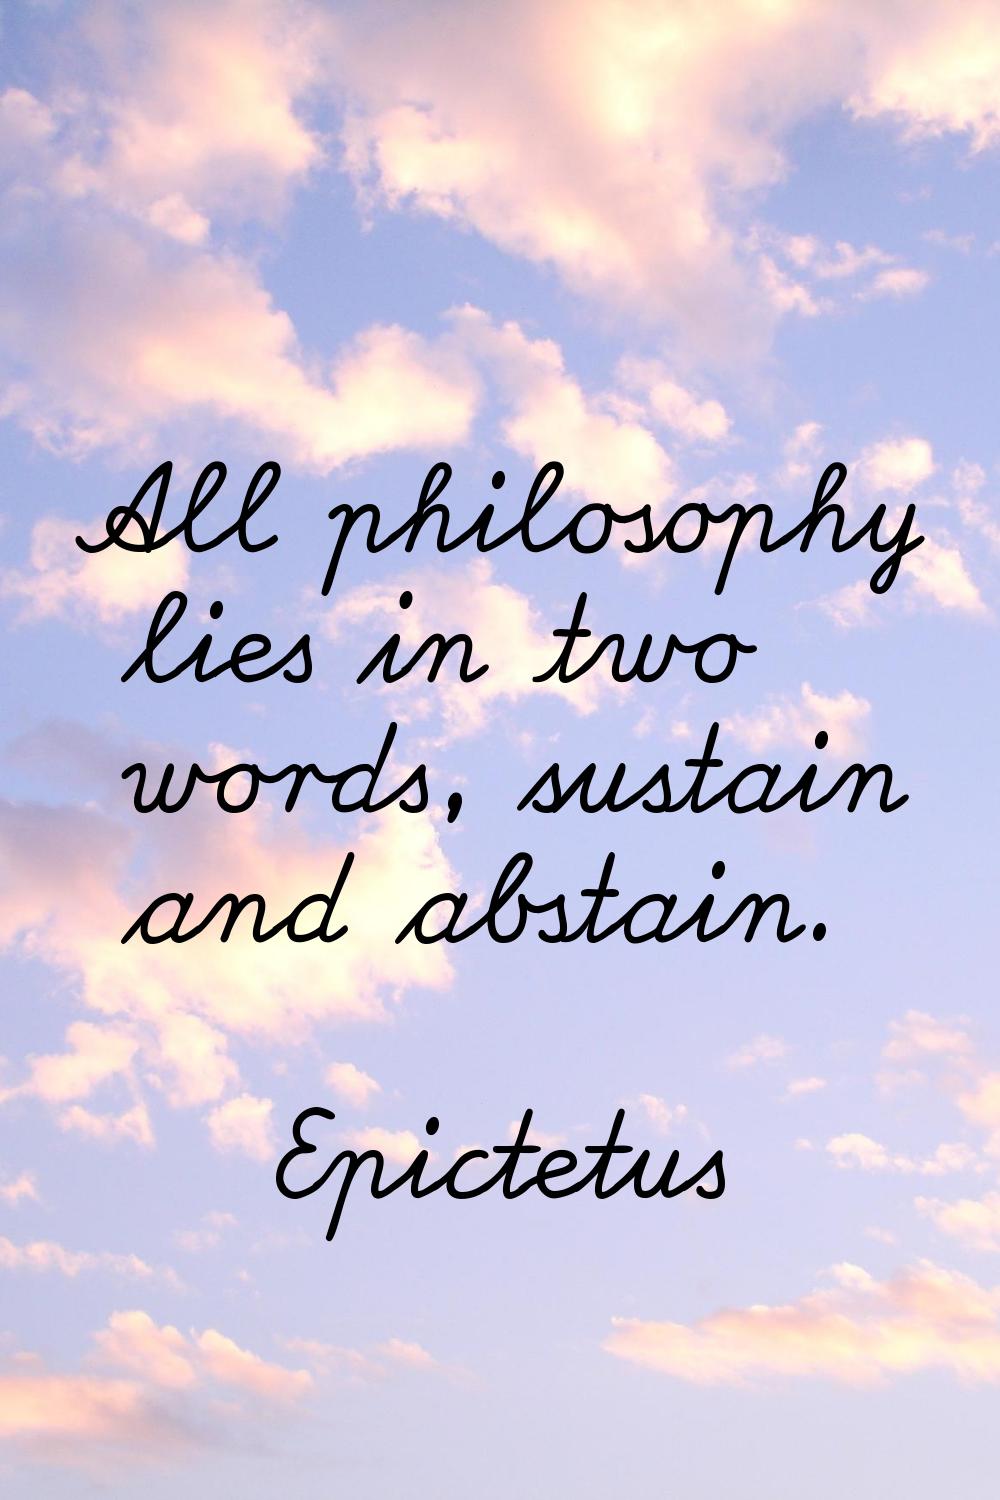 All philosophy lies in two words, sustain and abstain.